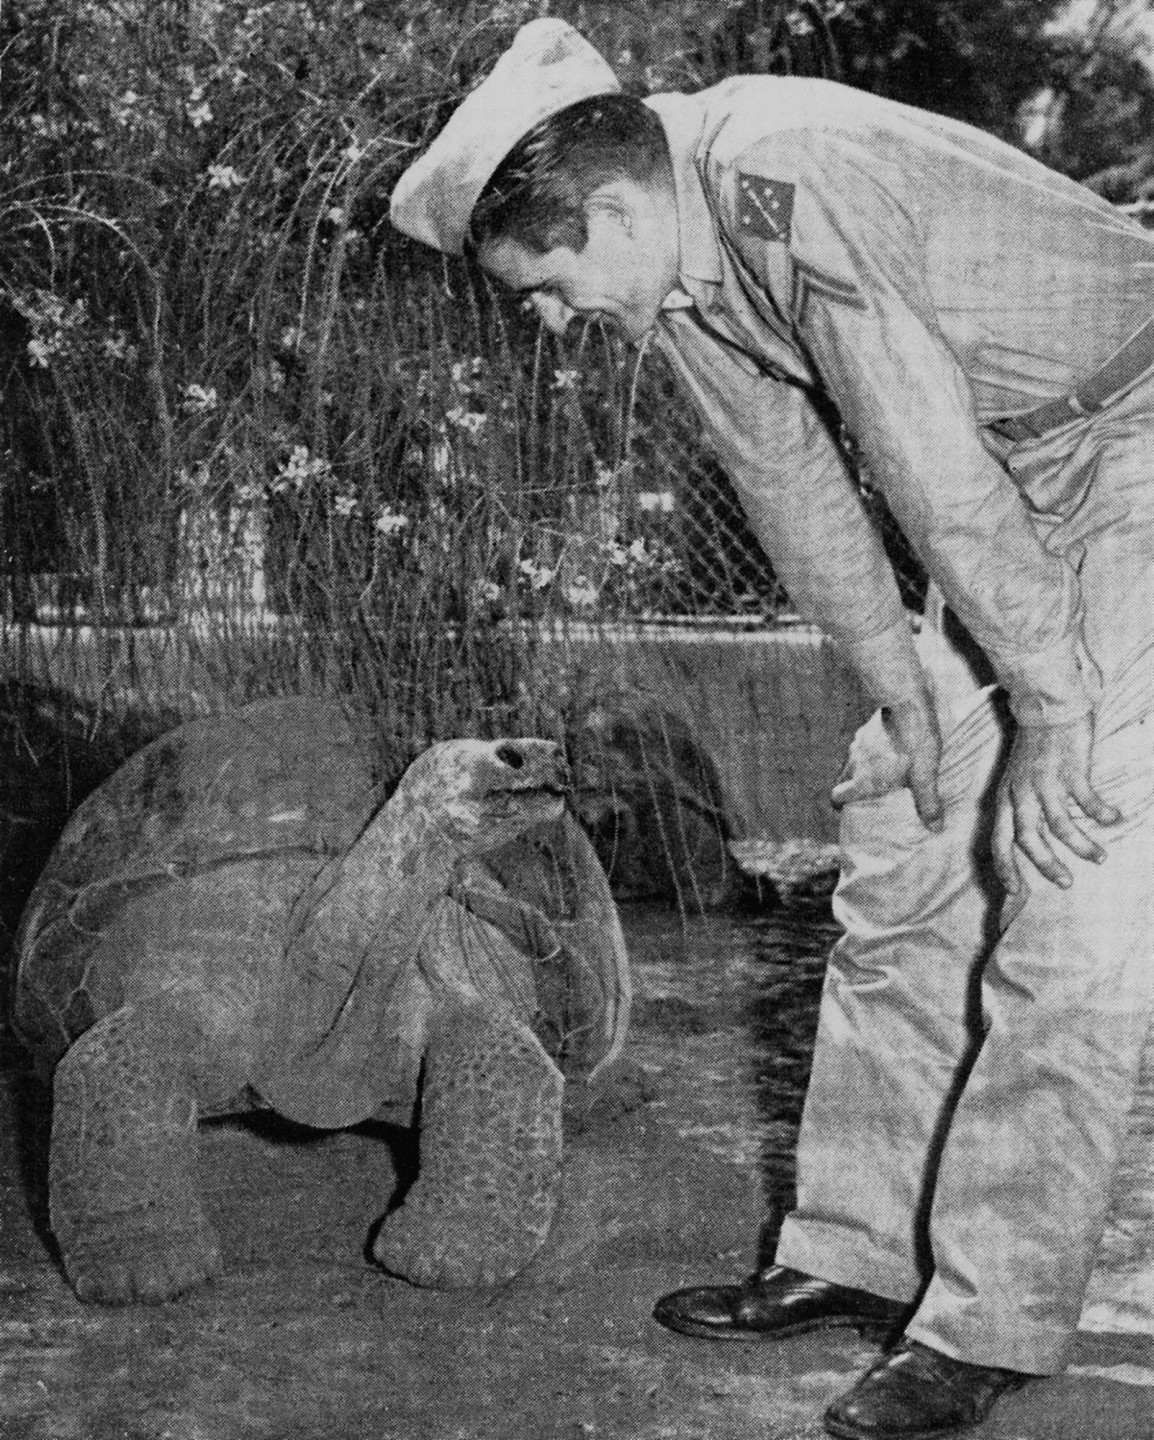 The San Diego Zoo continued to be a favorite place for military personnel in San Diego, who spread the word about the Zoo once they returned to their home towns. Here, Gertie the Galápagos tortoise says hello. Gertie actually had some interesting tales to tell, if he could have: he had actually been to Hollywood, with a part in the film Malaya with Dorothy Lamour and Jack Haley. He played a rock that Jack Haley's character sits on—then leaps up from when the 